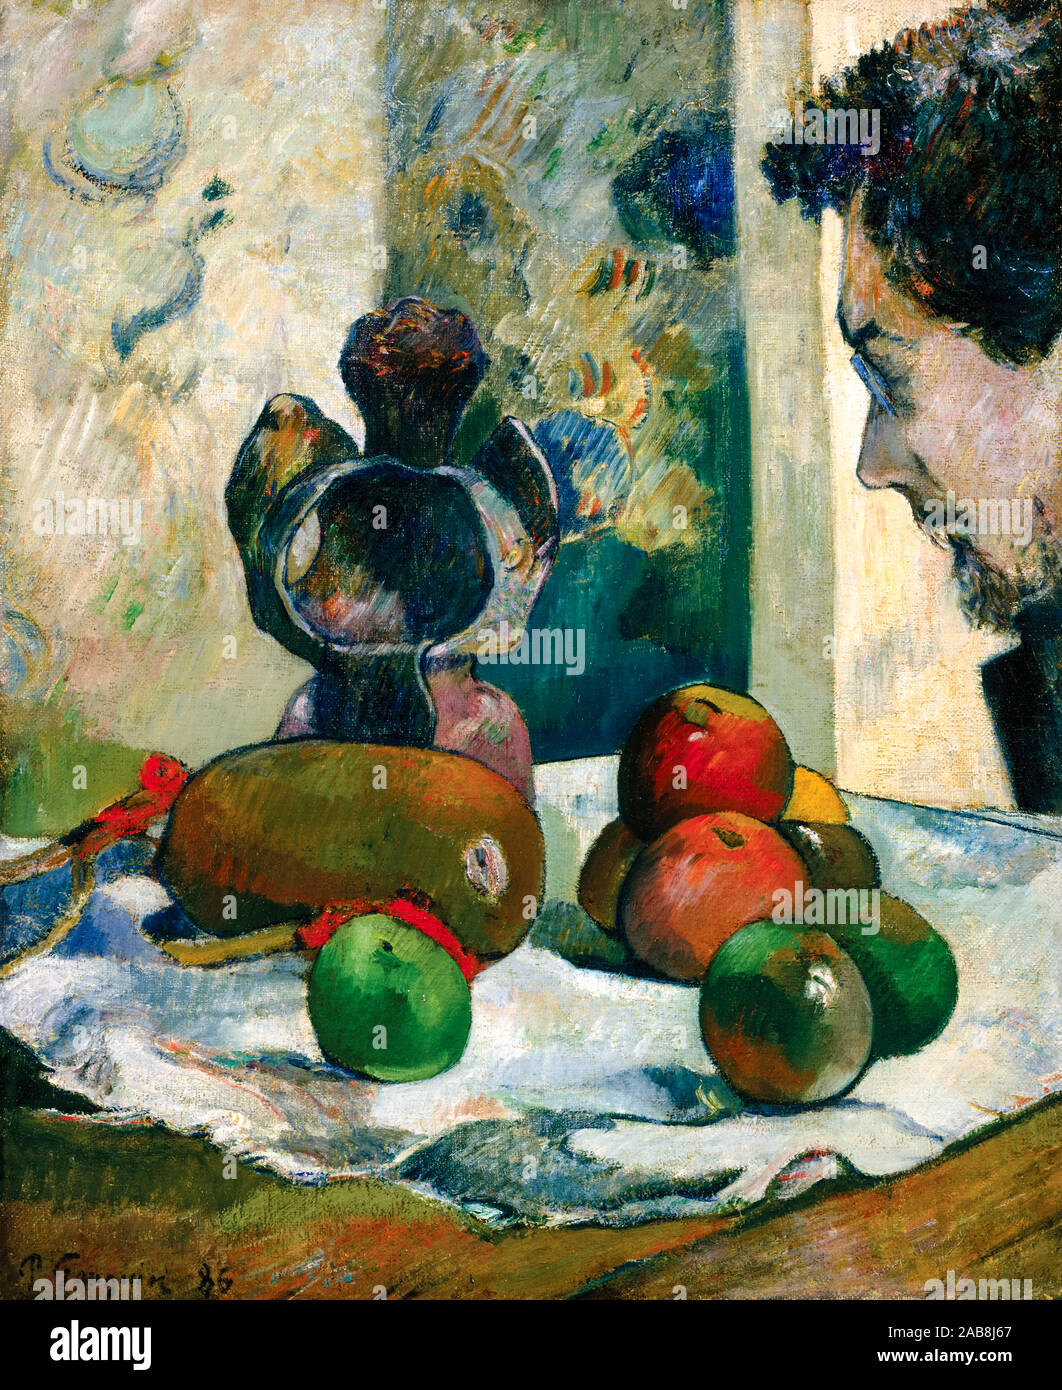 Paul Gauguin, Still Life with Profile of Laval, painting, 1886 Stock Photo